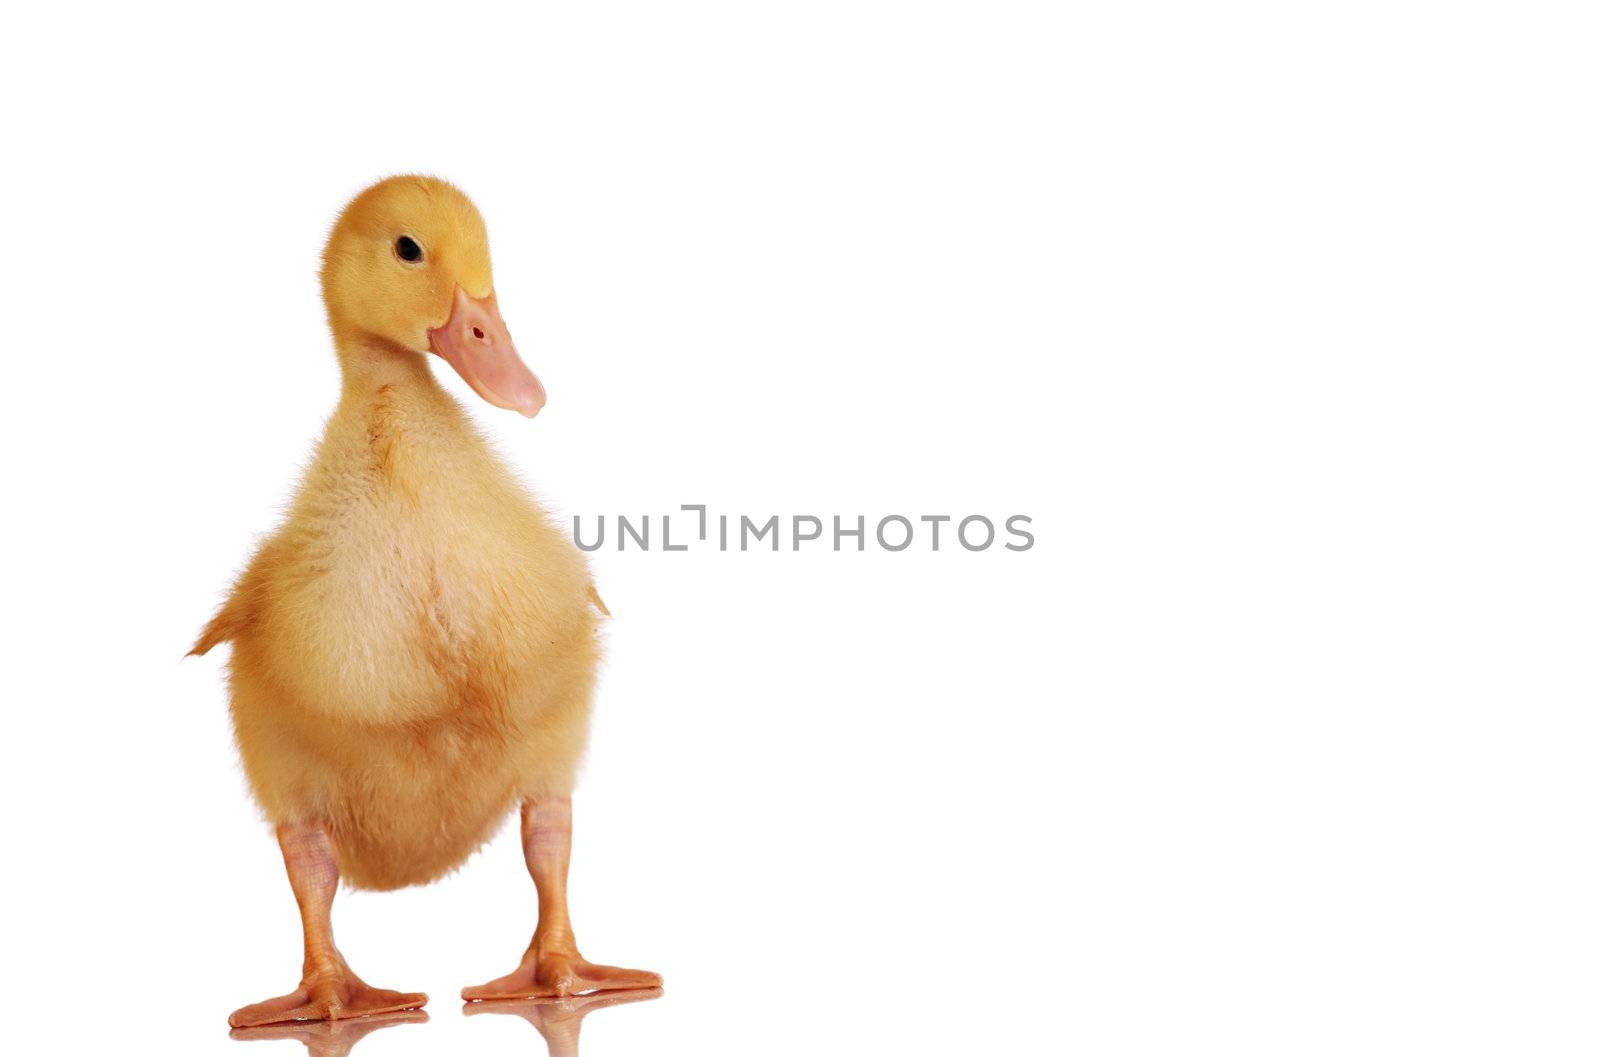 One young yellow duckling standing, isolated on white